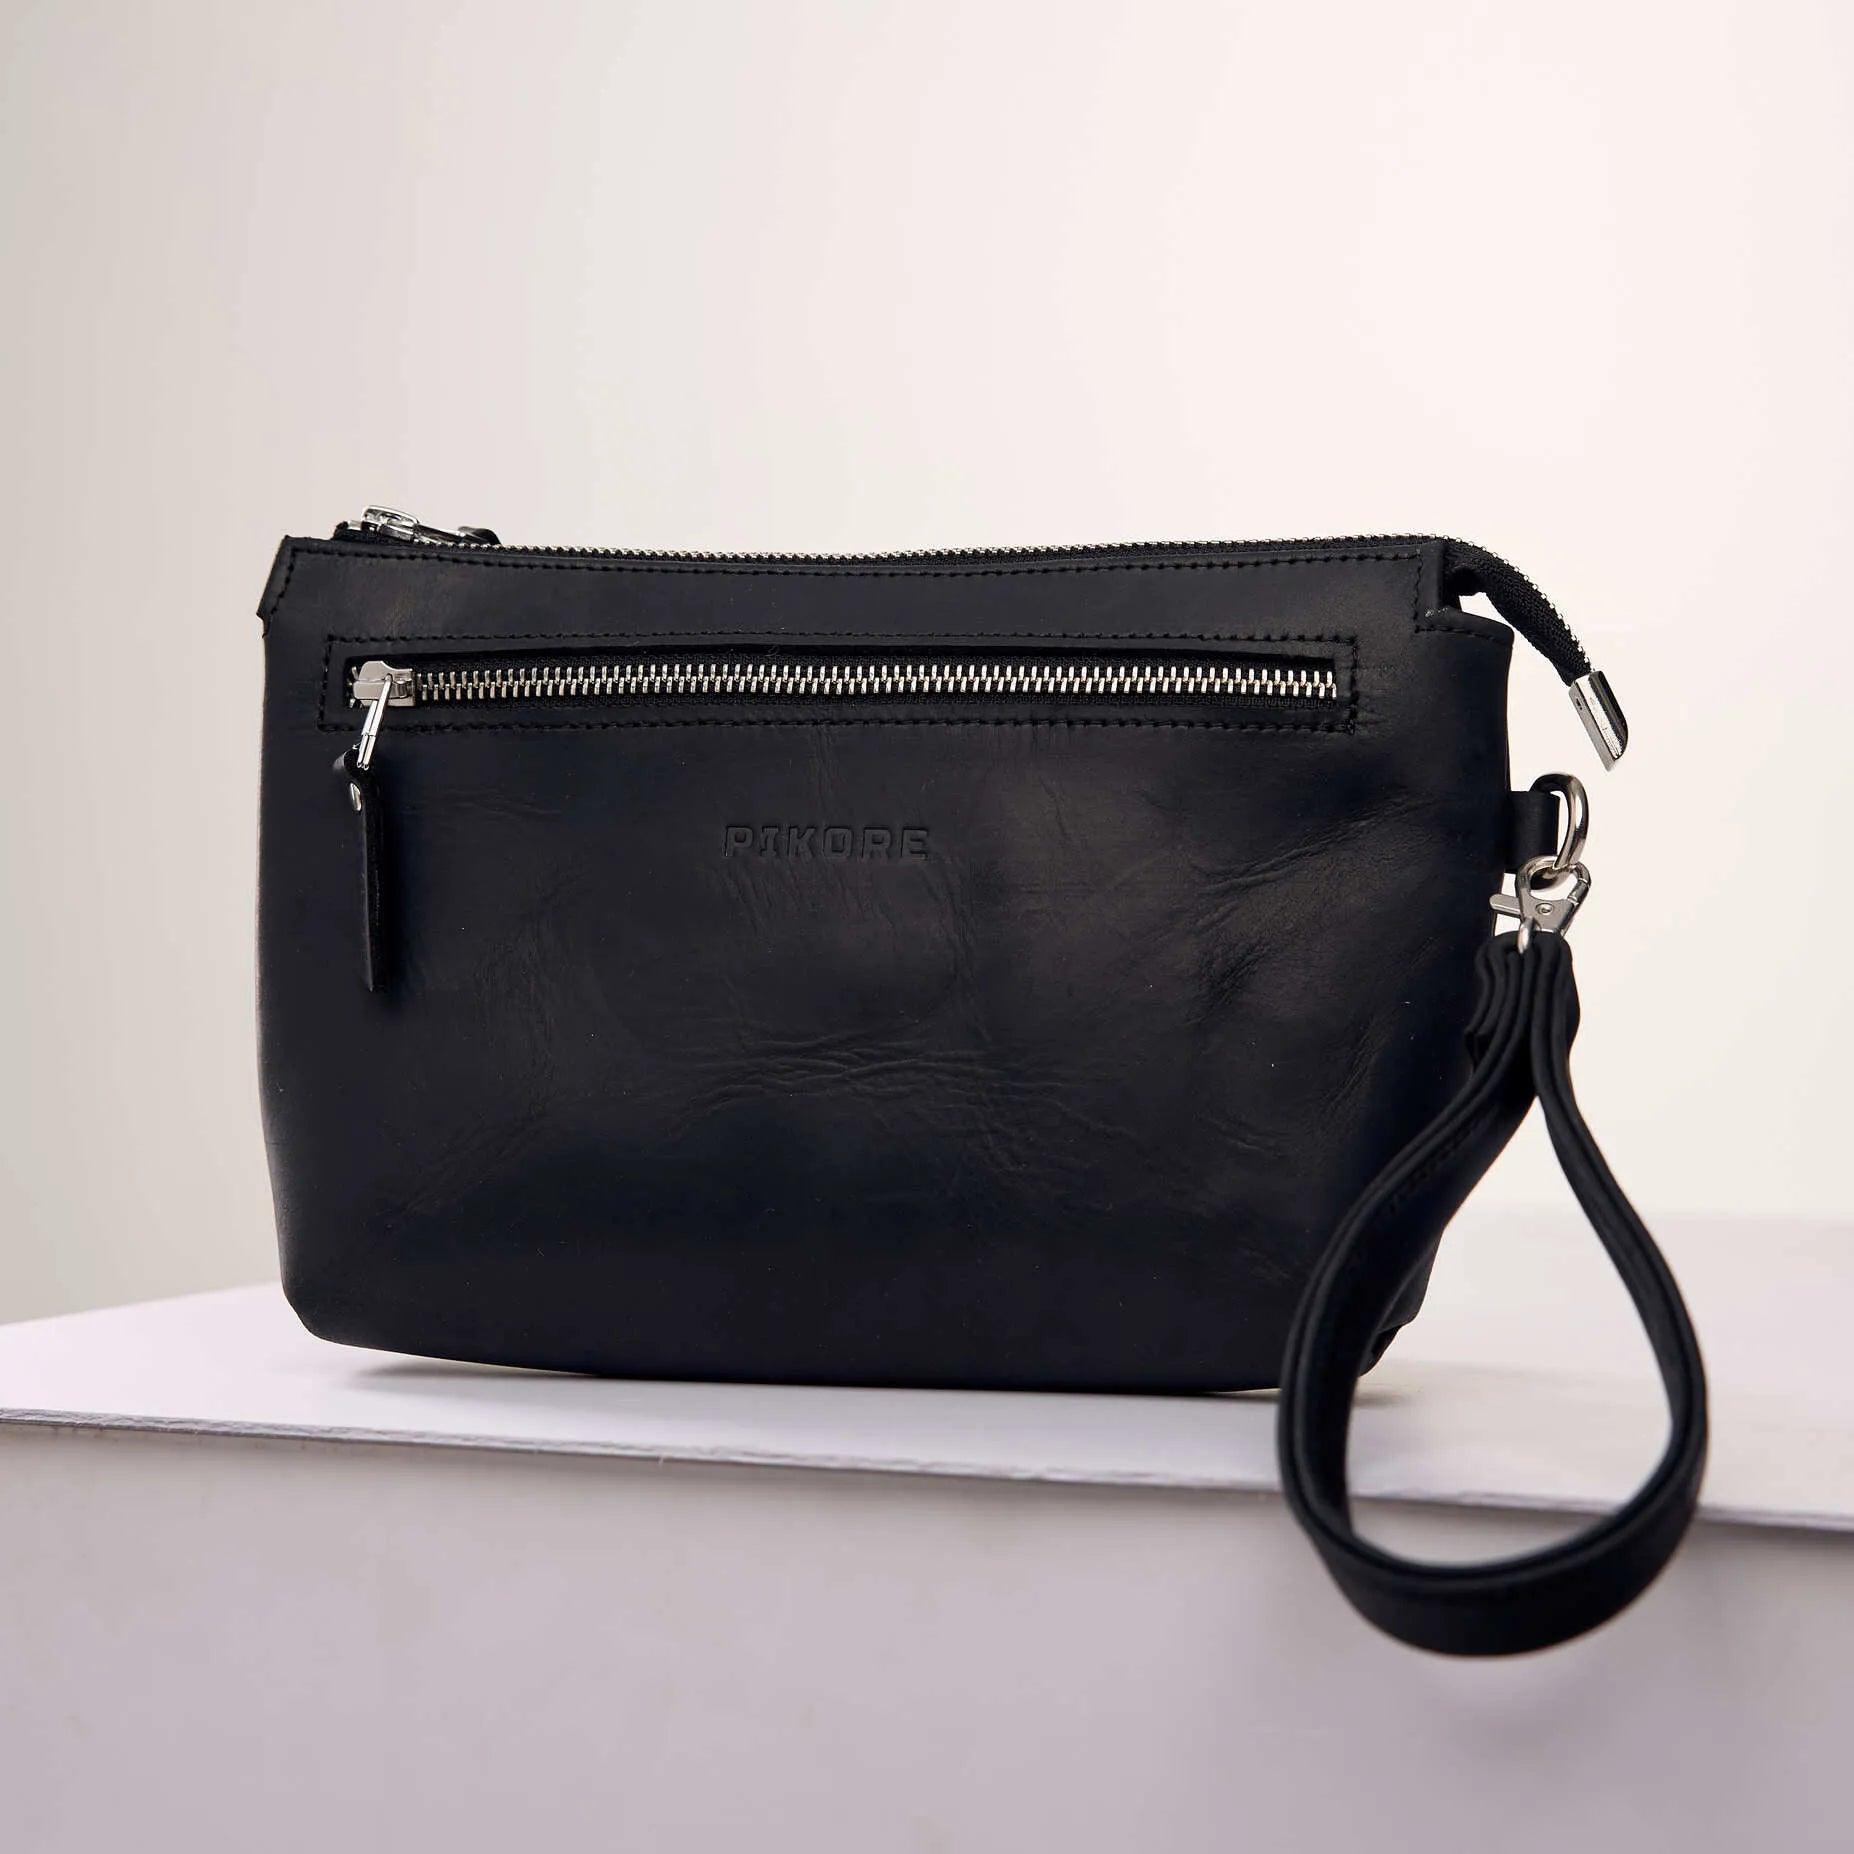 Leather Clutch Bag For Men - Pikore